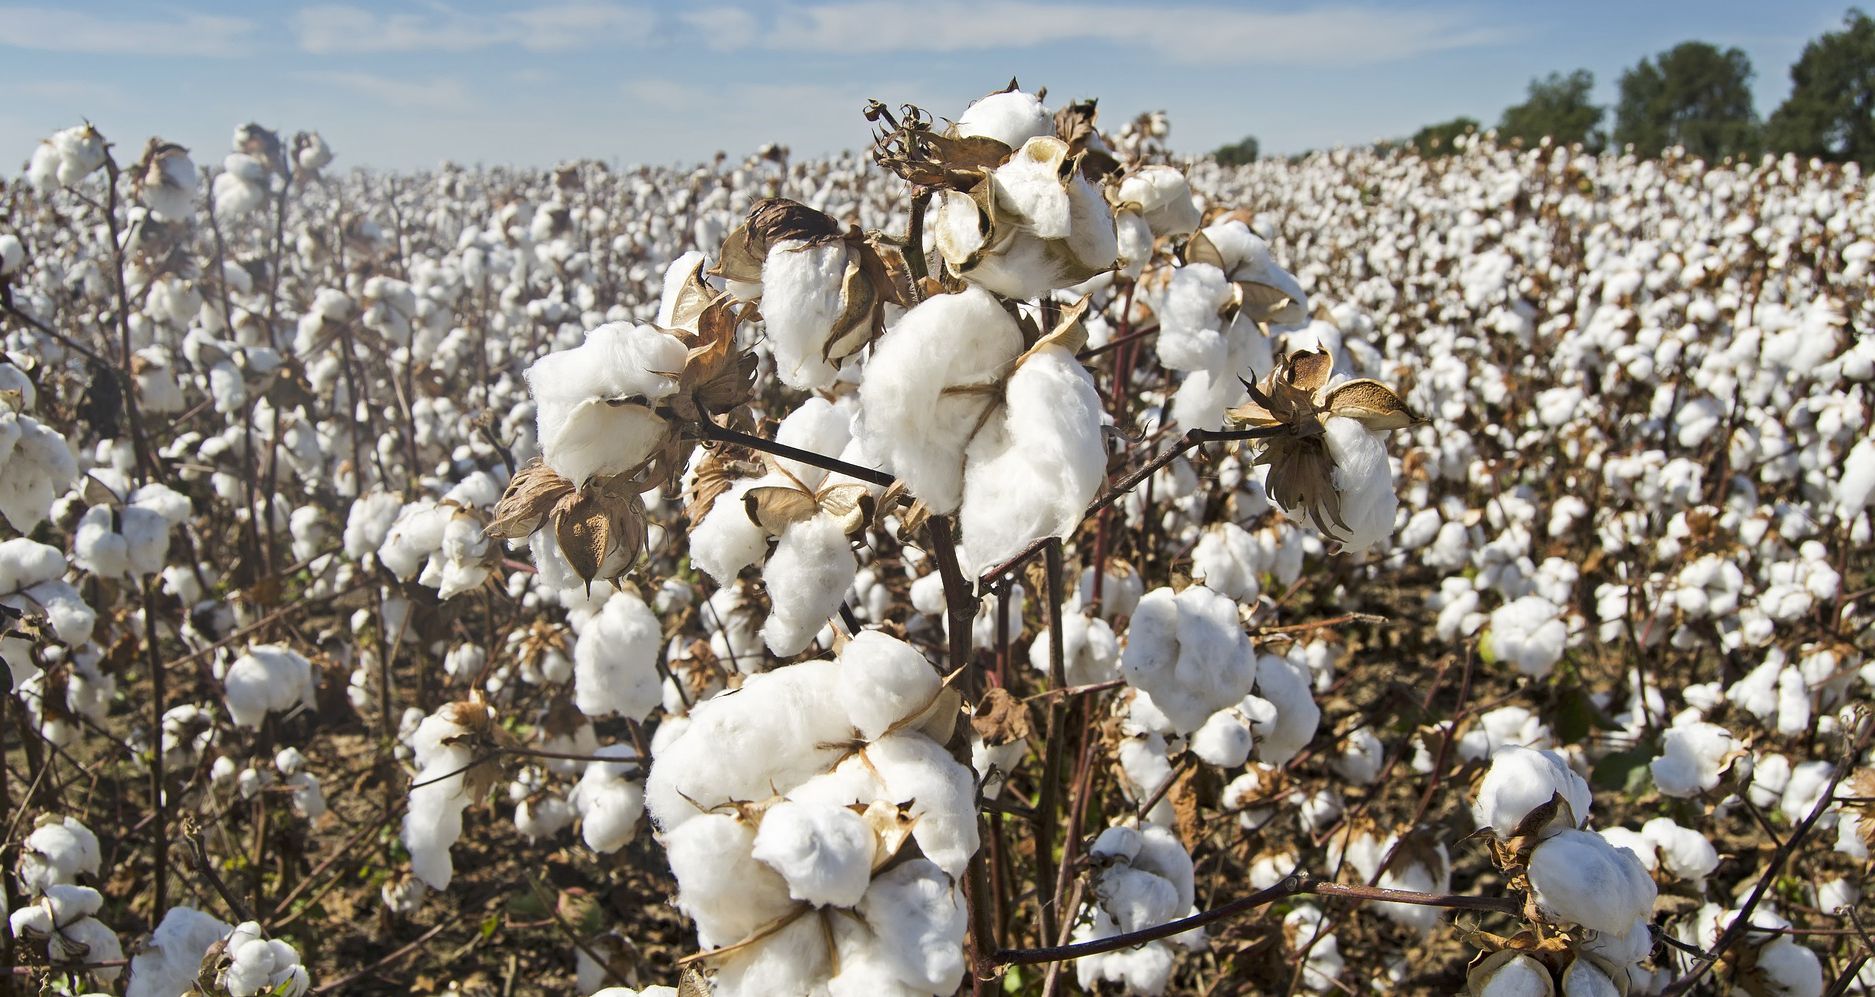 America’s Cotton Shortage Might Take the Shirt Off Your Back Headline